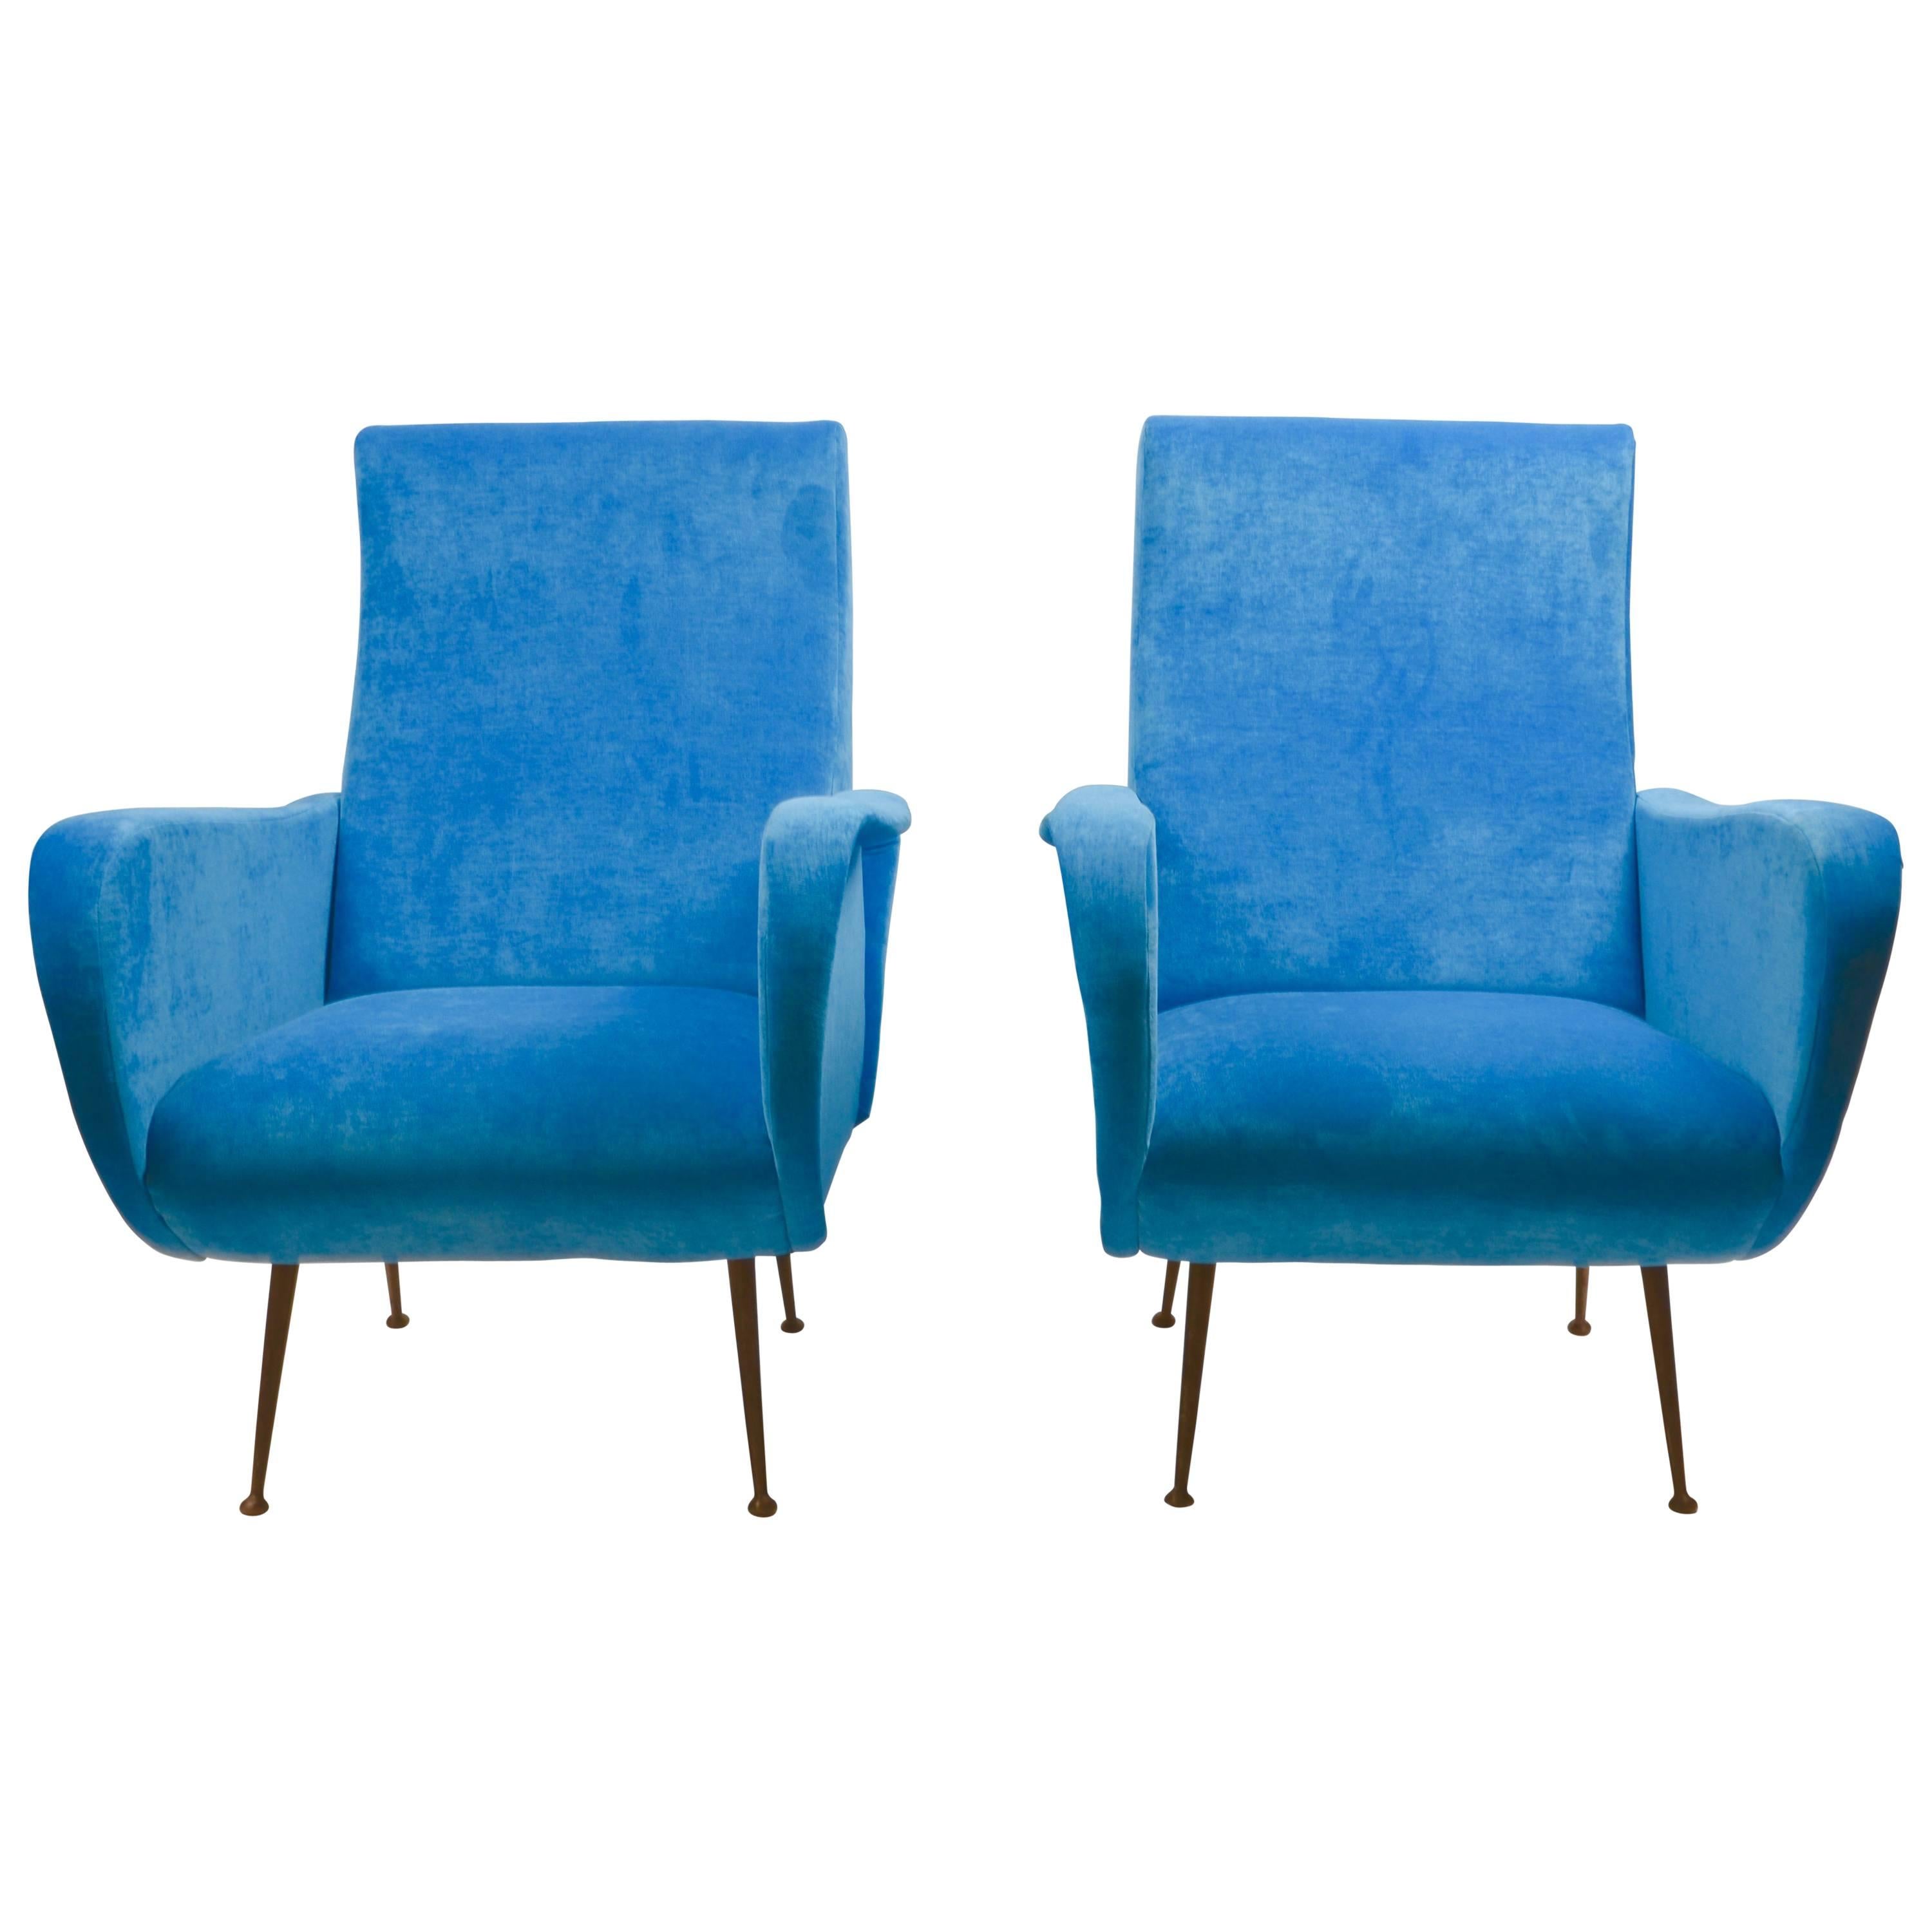 Pair of Lounge Chairs, Italy, 1950s